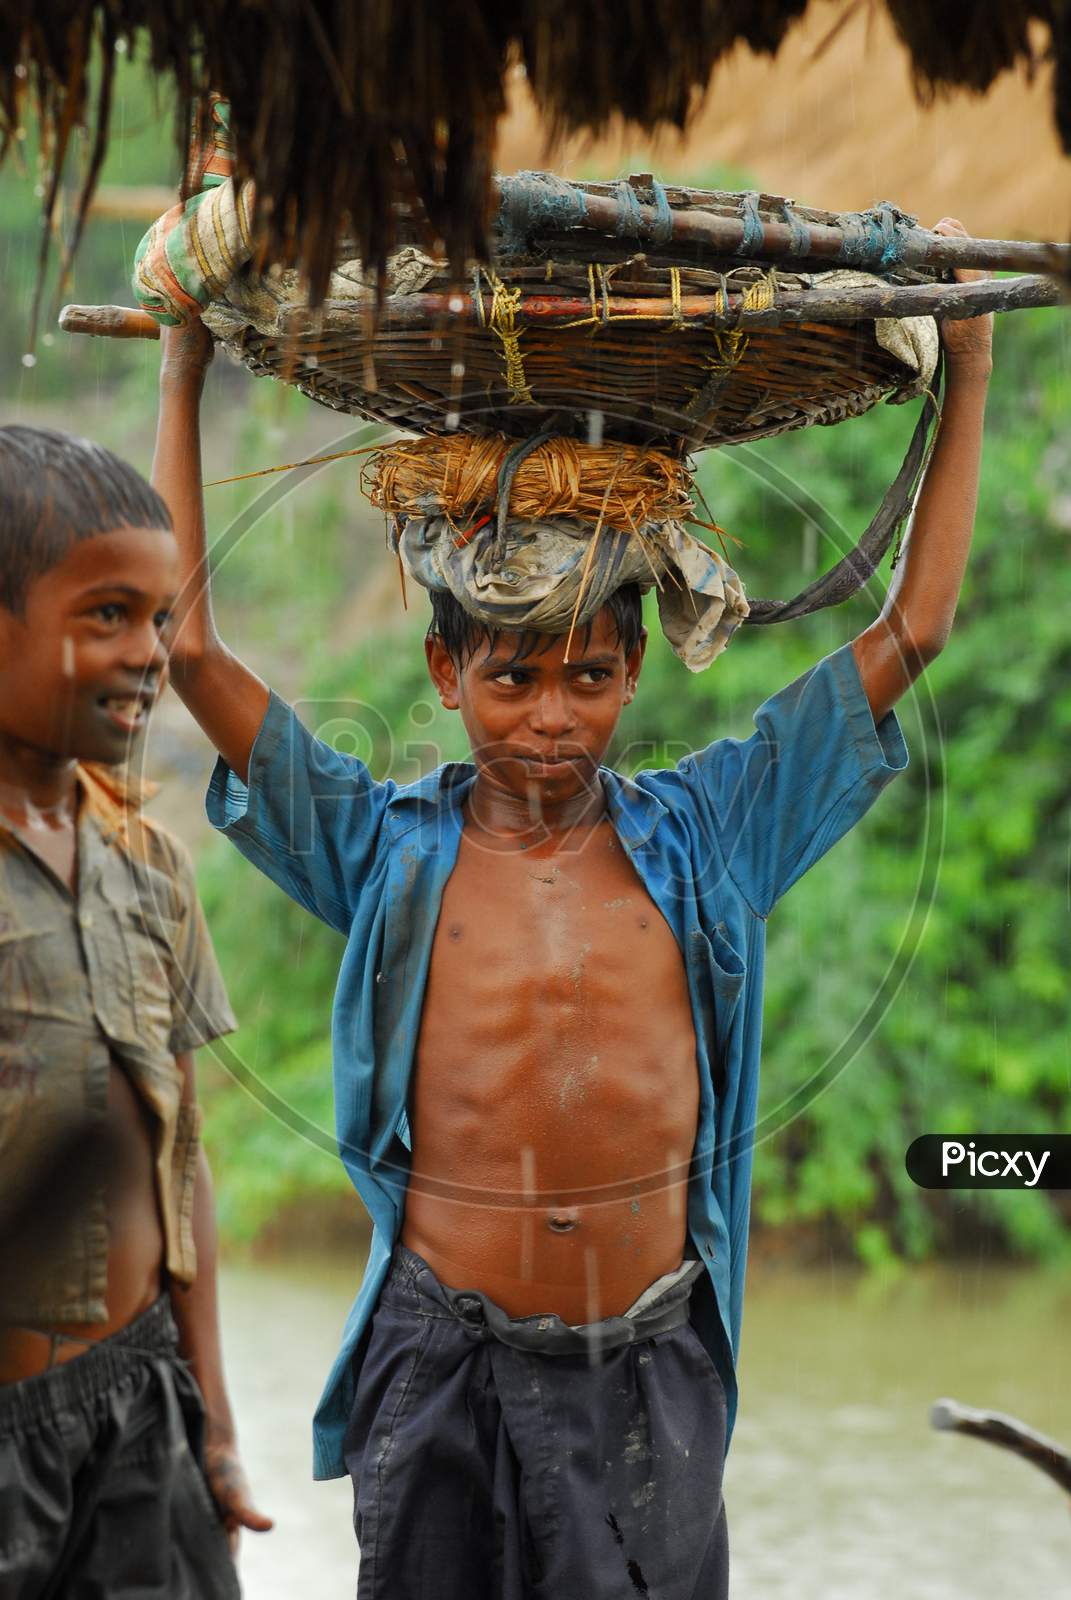 Indian little boy carrying a basket during rain